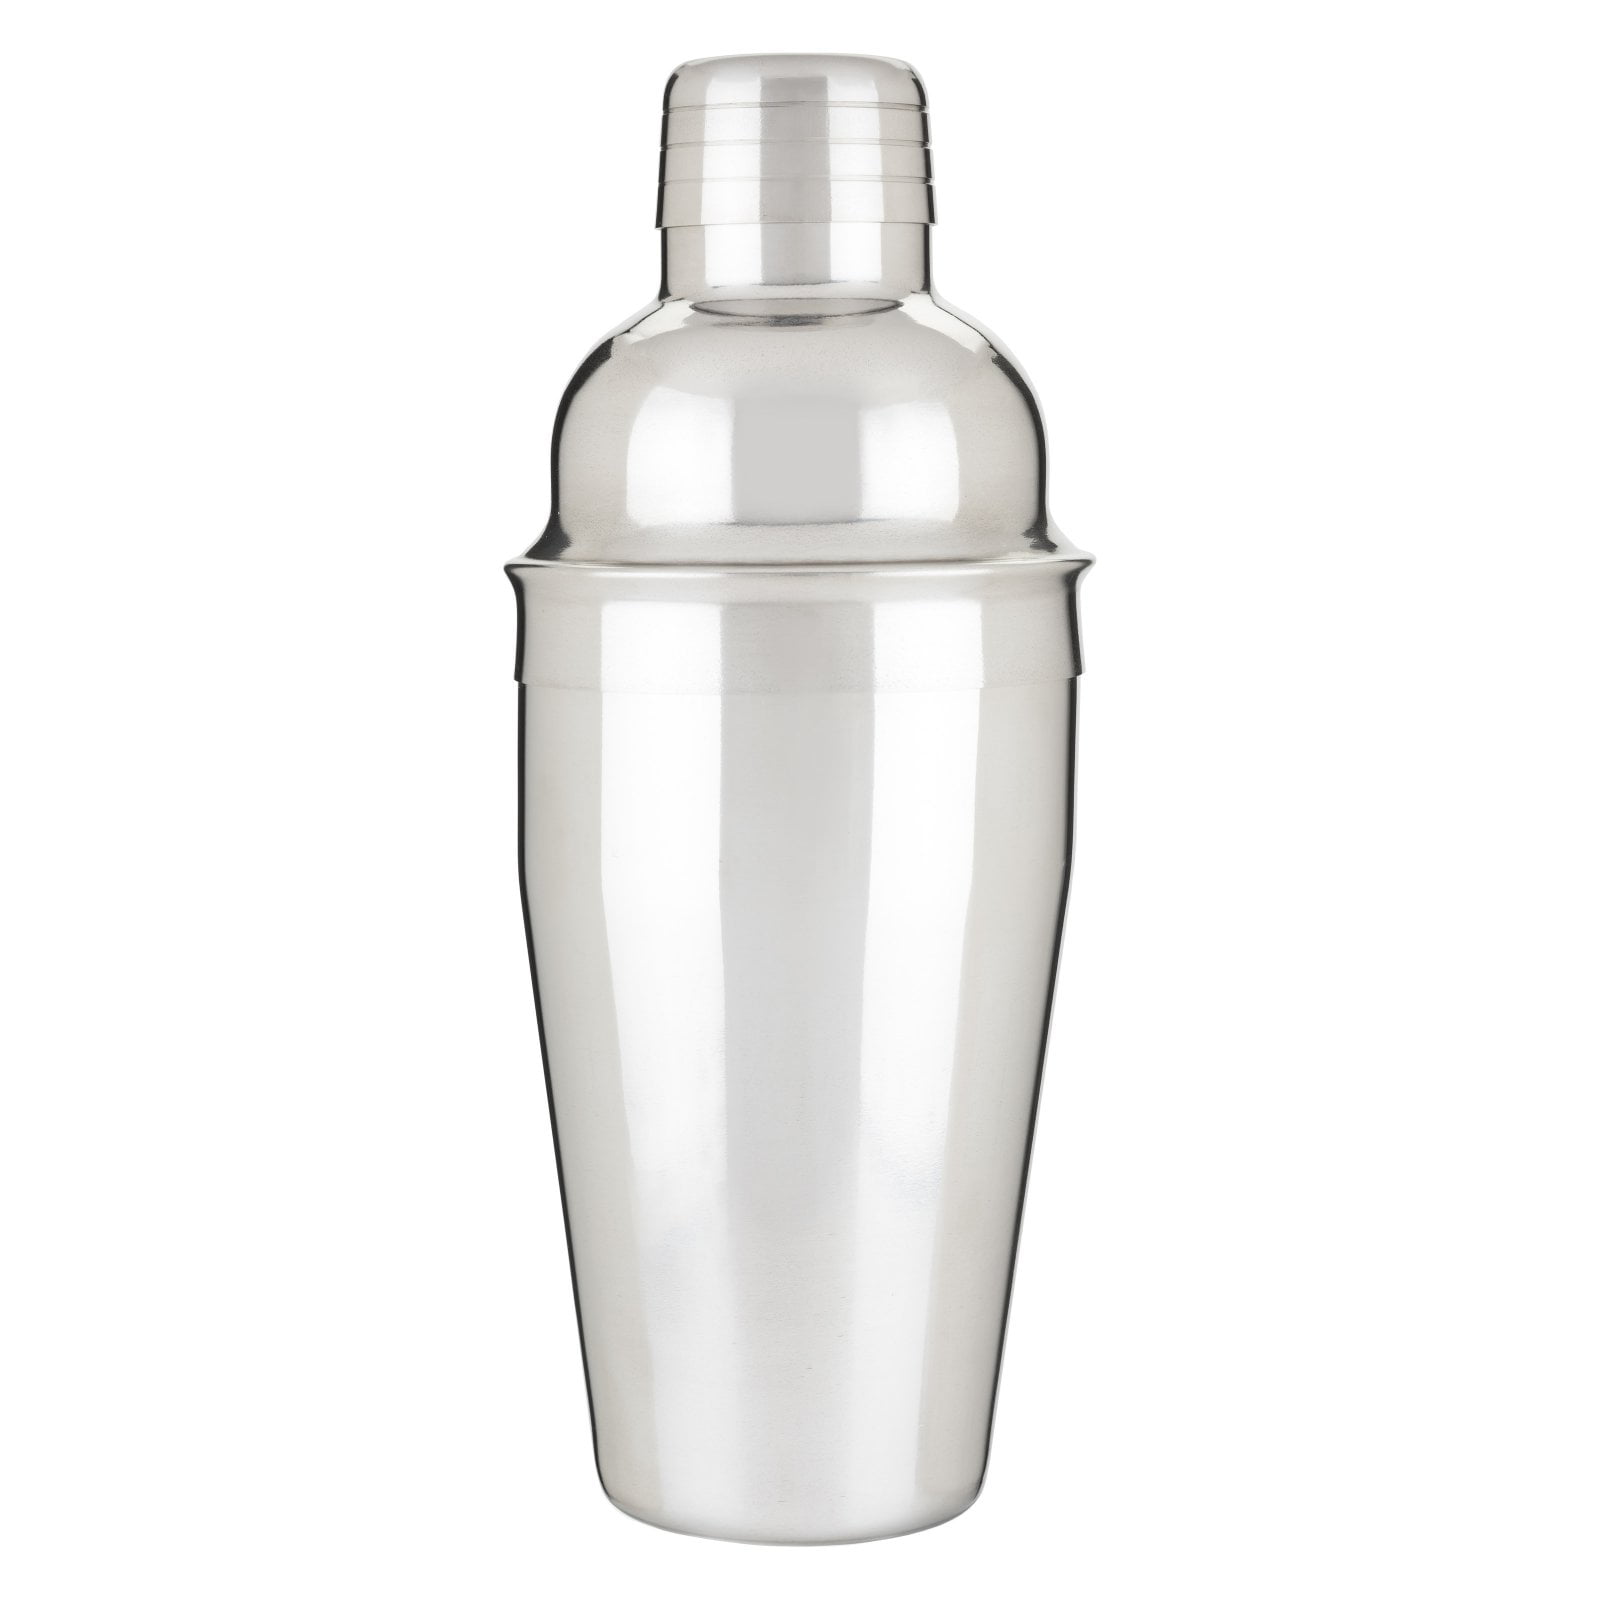 Curtis Stone Spill-Free Glass Oil Infuser 